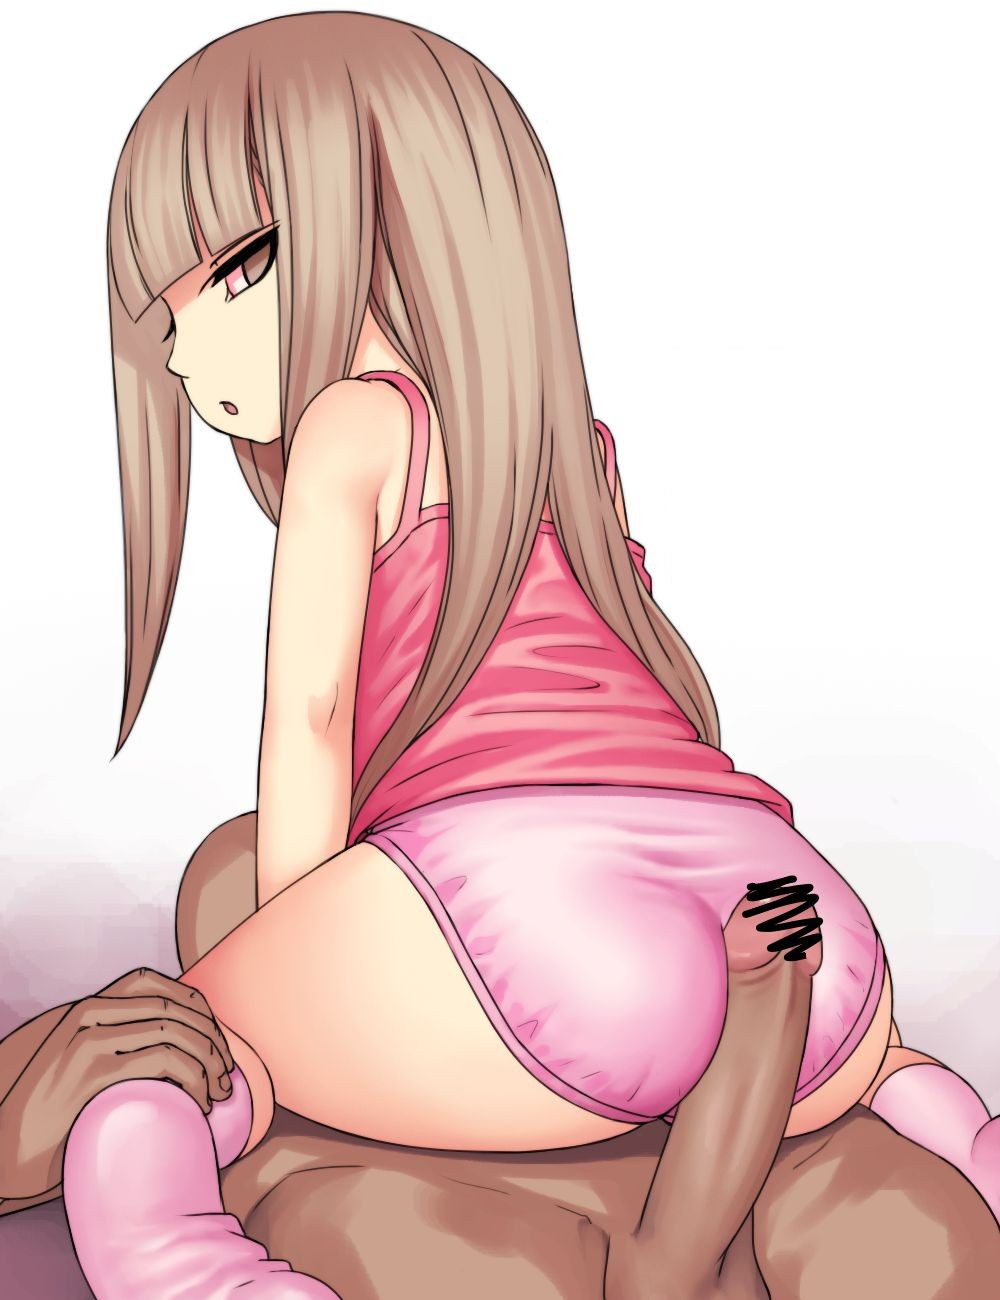 Amature Porn [Loli Ass Job] Secondary Loli Ass Job Secondary Erotic Image That Is Safe Even At An Age That Cannot Be Inserted To Rub The Dick Against The Ass Of A Secondary Loli Girl Stroking